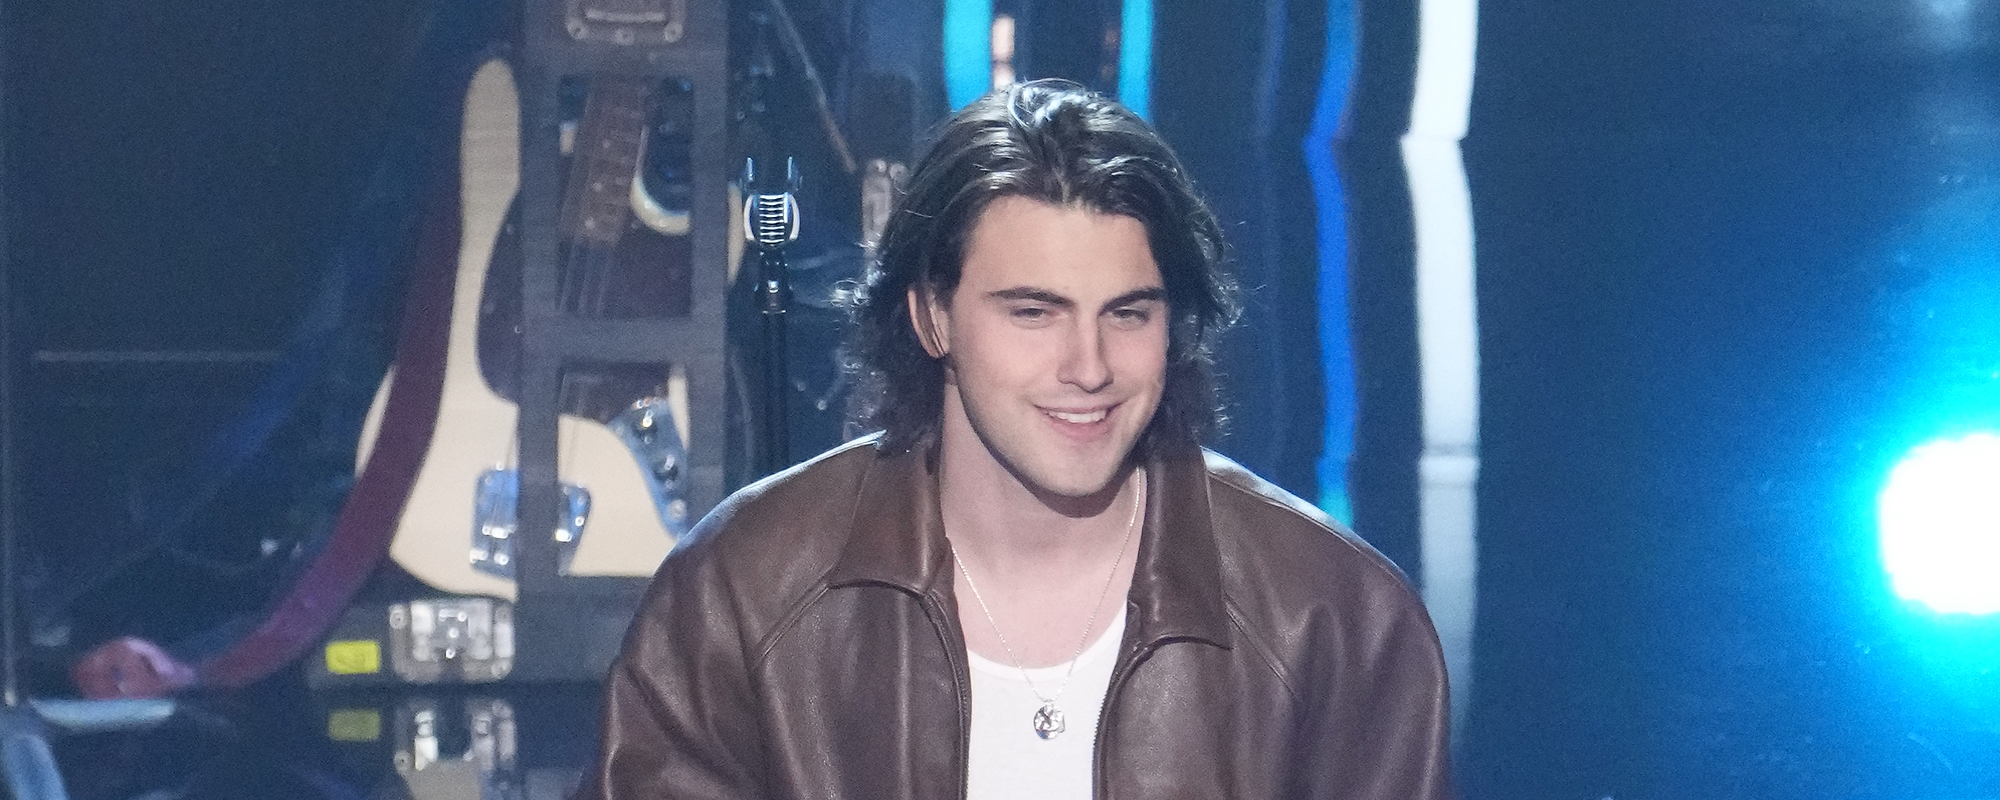 ‘American Idol’ Contestant That Made Katy Perry Swoon, Michael Williams, Shares Soulful Miley Cyrus Cover